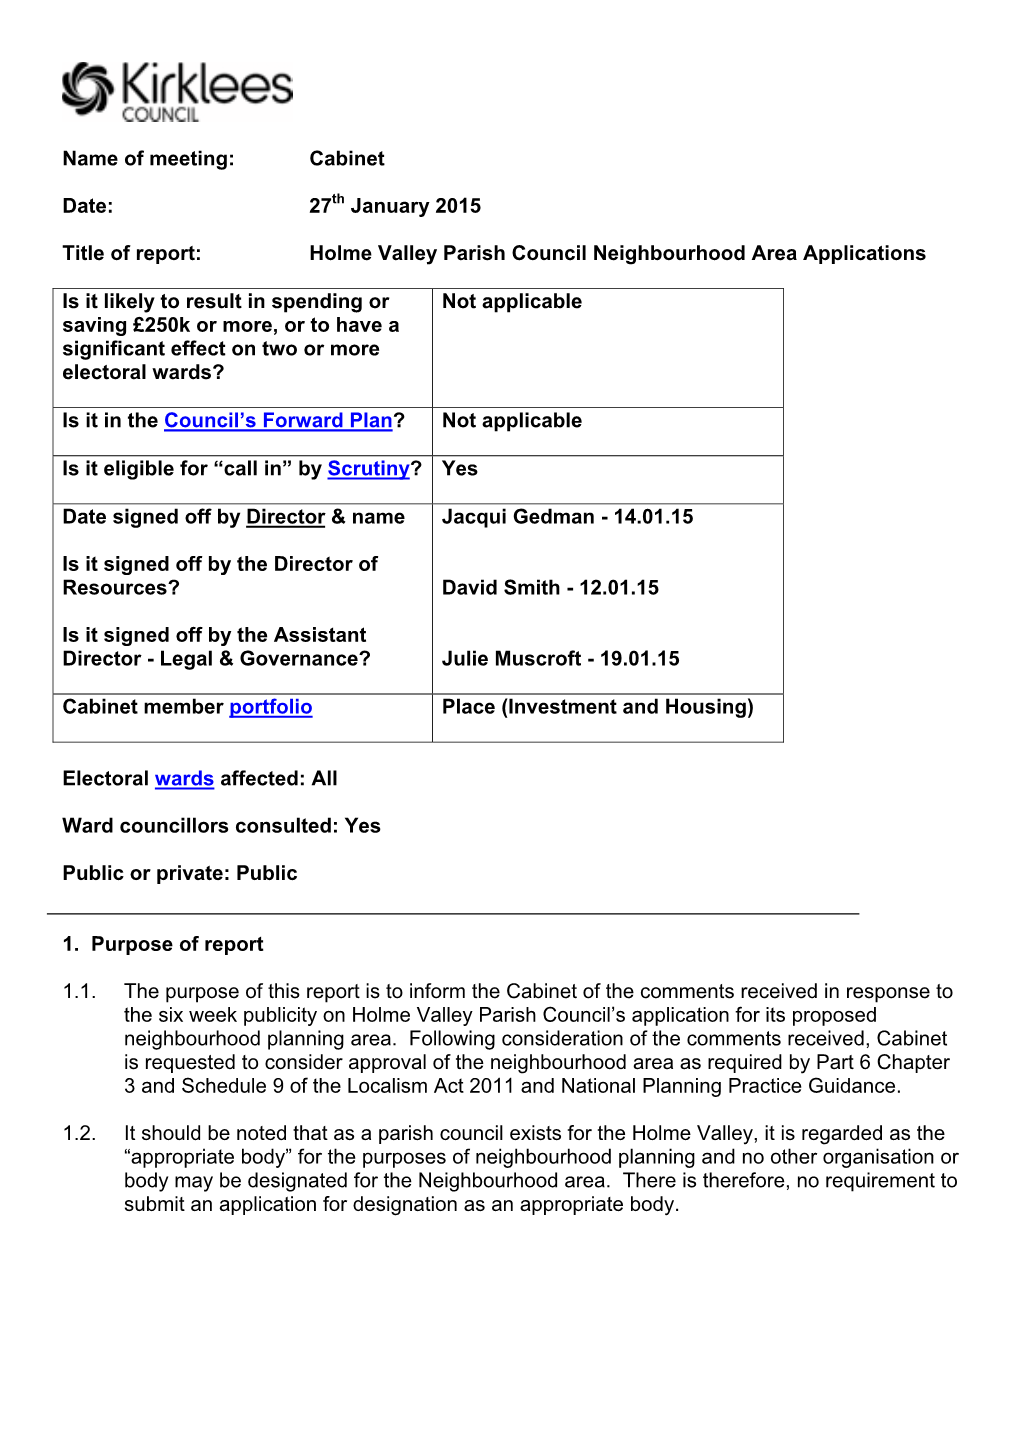 Name of Meeting: Cabinet Date: 27Th January 2015 Title of Report: Holme Valley Parish Council Neighbourhood Area Applicatio